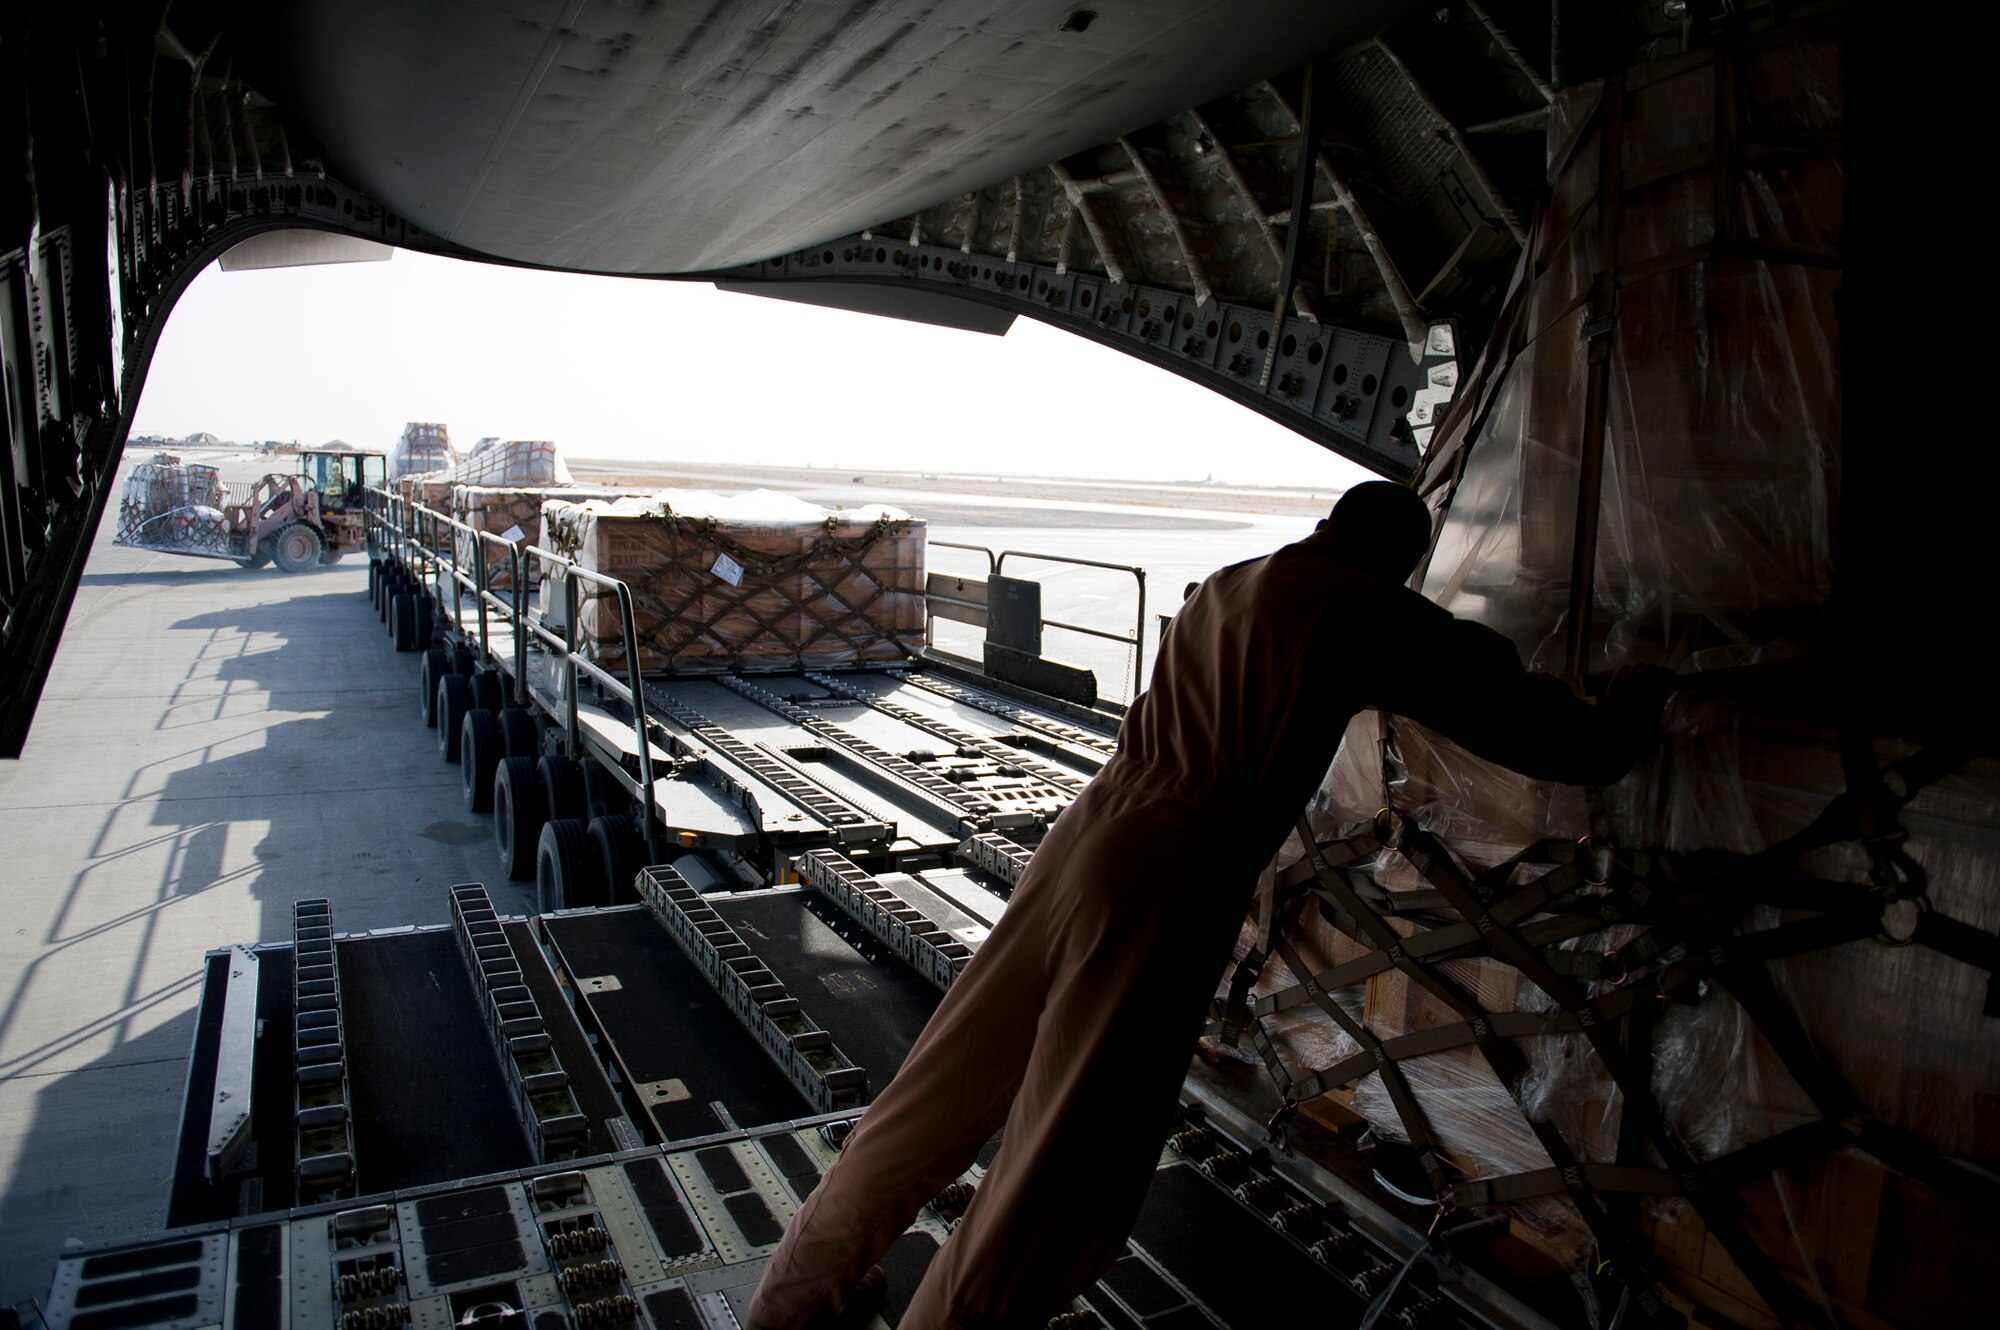 Staff Sgt. Sean Sullivan, an 817th Expeditionary Airlift Squadron loadmaster, pushes cargo while unloading a C-17 Globemaster III aircraft Aug. 18, 2011, at Kandahar Air Field, Afghanistan, during a mission to transport equipment and supplies from Incirlik Air Base, Turkey. Loadmasters not only ensure the cargo is properly secured during flight, but also help with the unloading. (U.S. Air Force photo by Tech. Sgt. Michael B. Keller/Released)